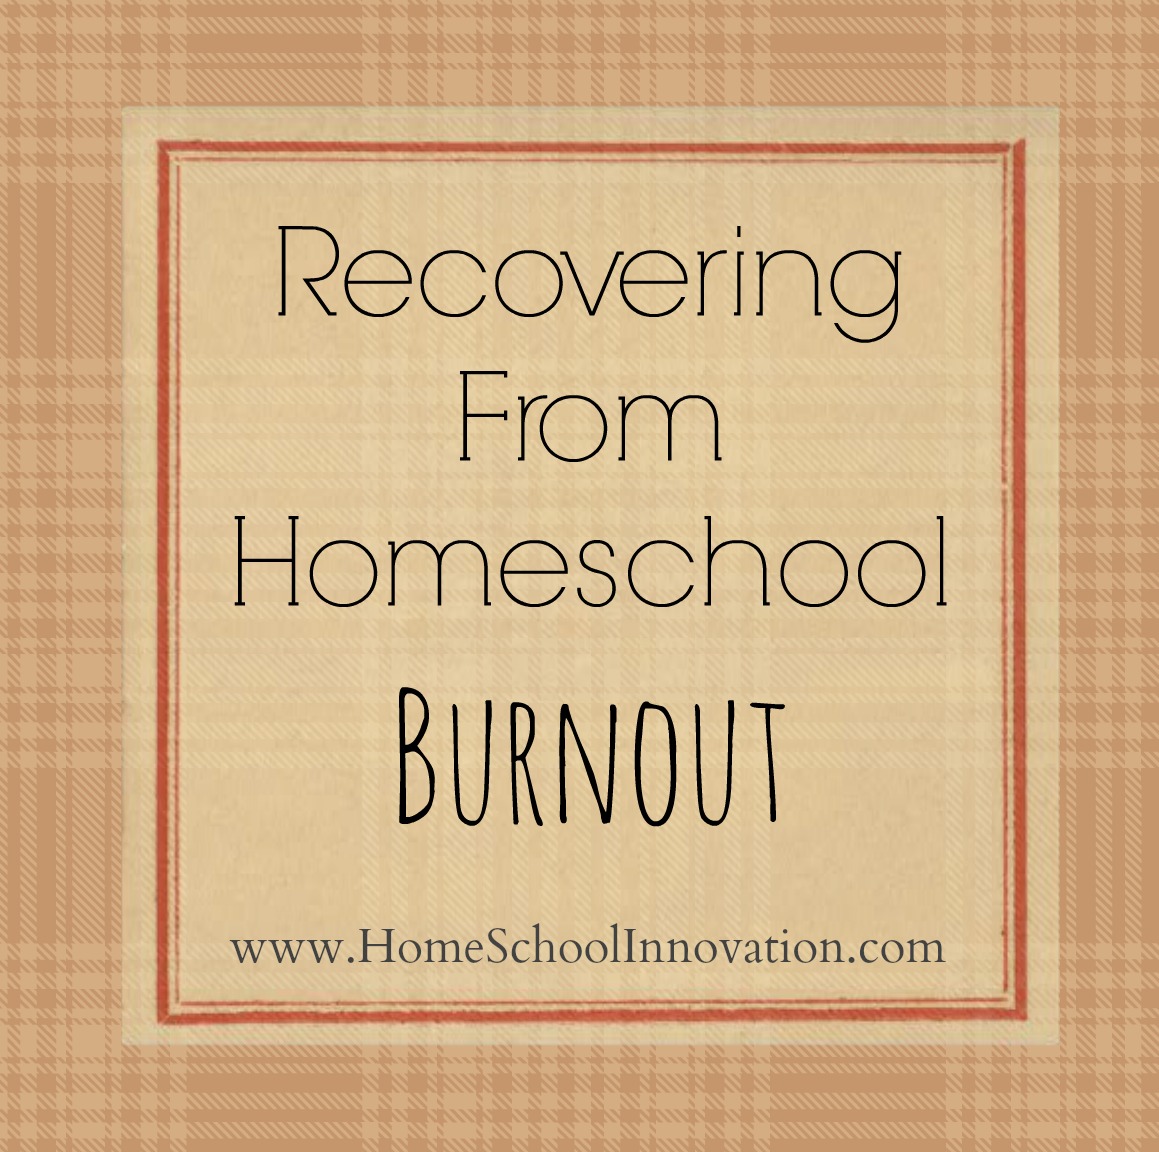 Recovering from Homeschool Burnout